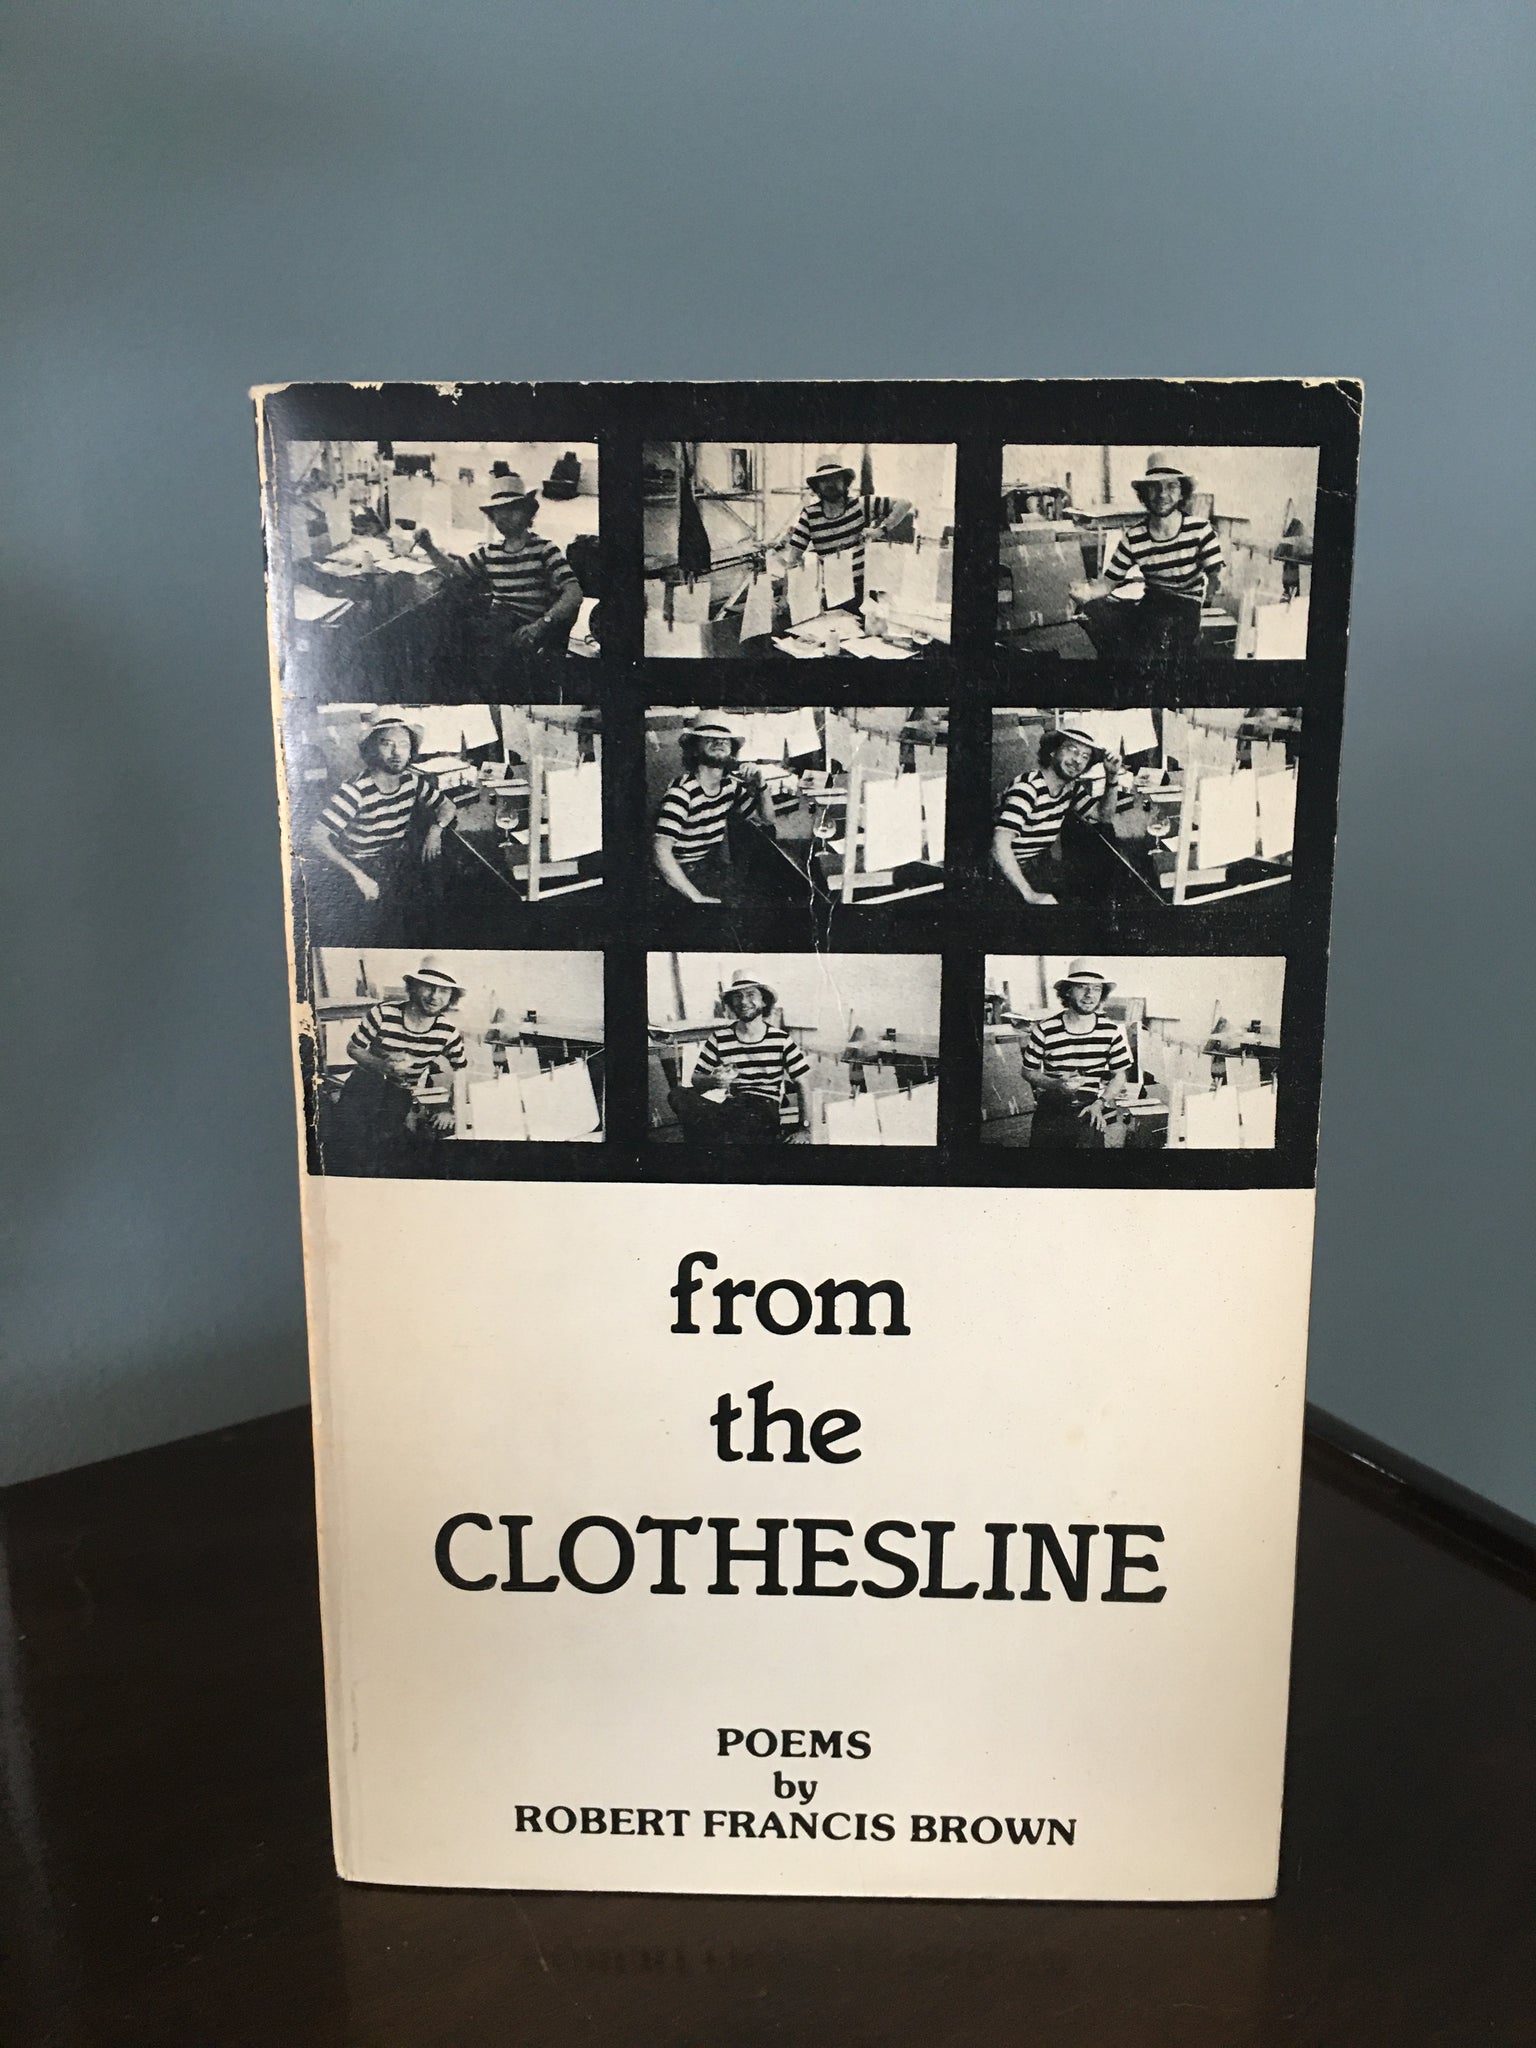 From the Clothesline